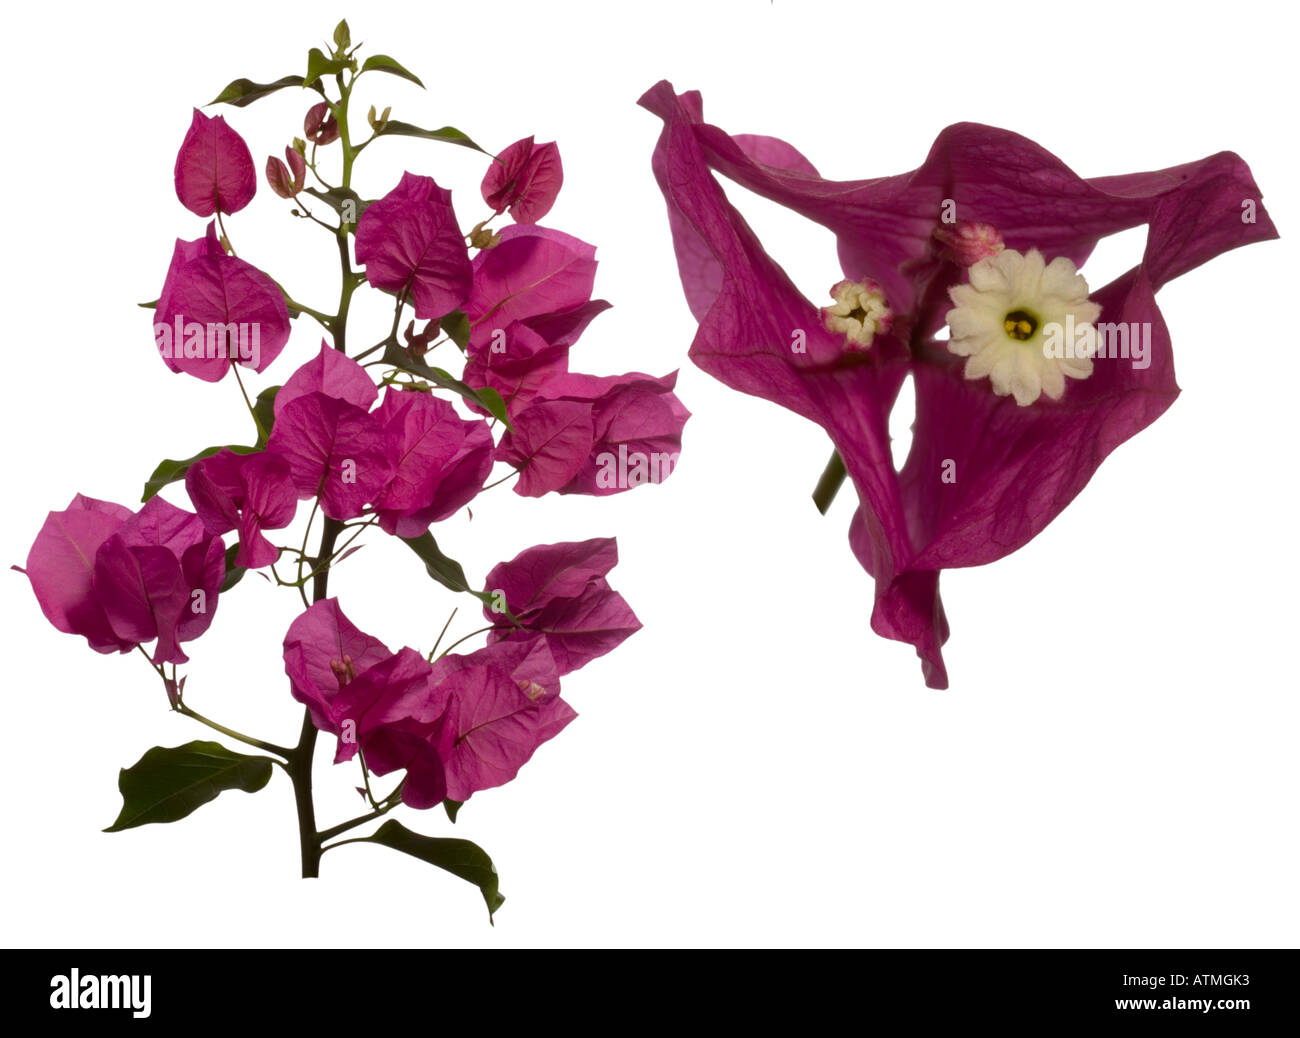 Bougainvillea glabra Cut Out Stock Images & Pictures - Alamy